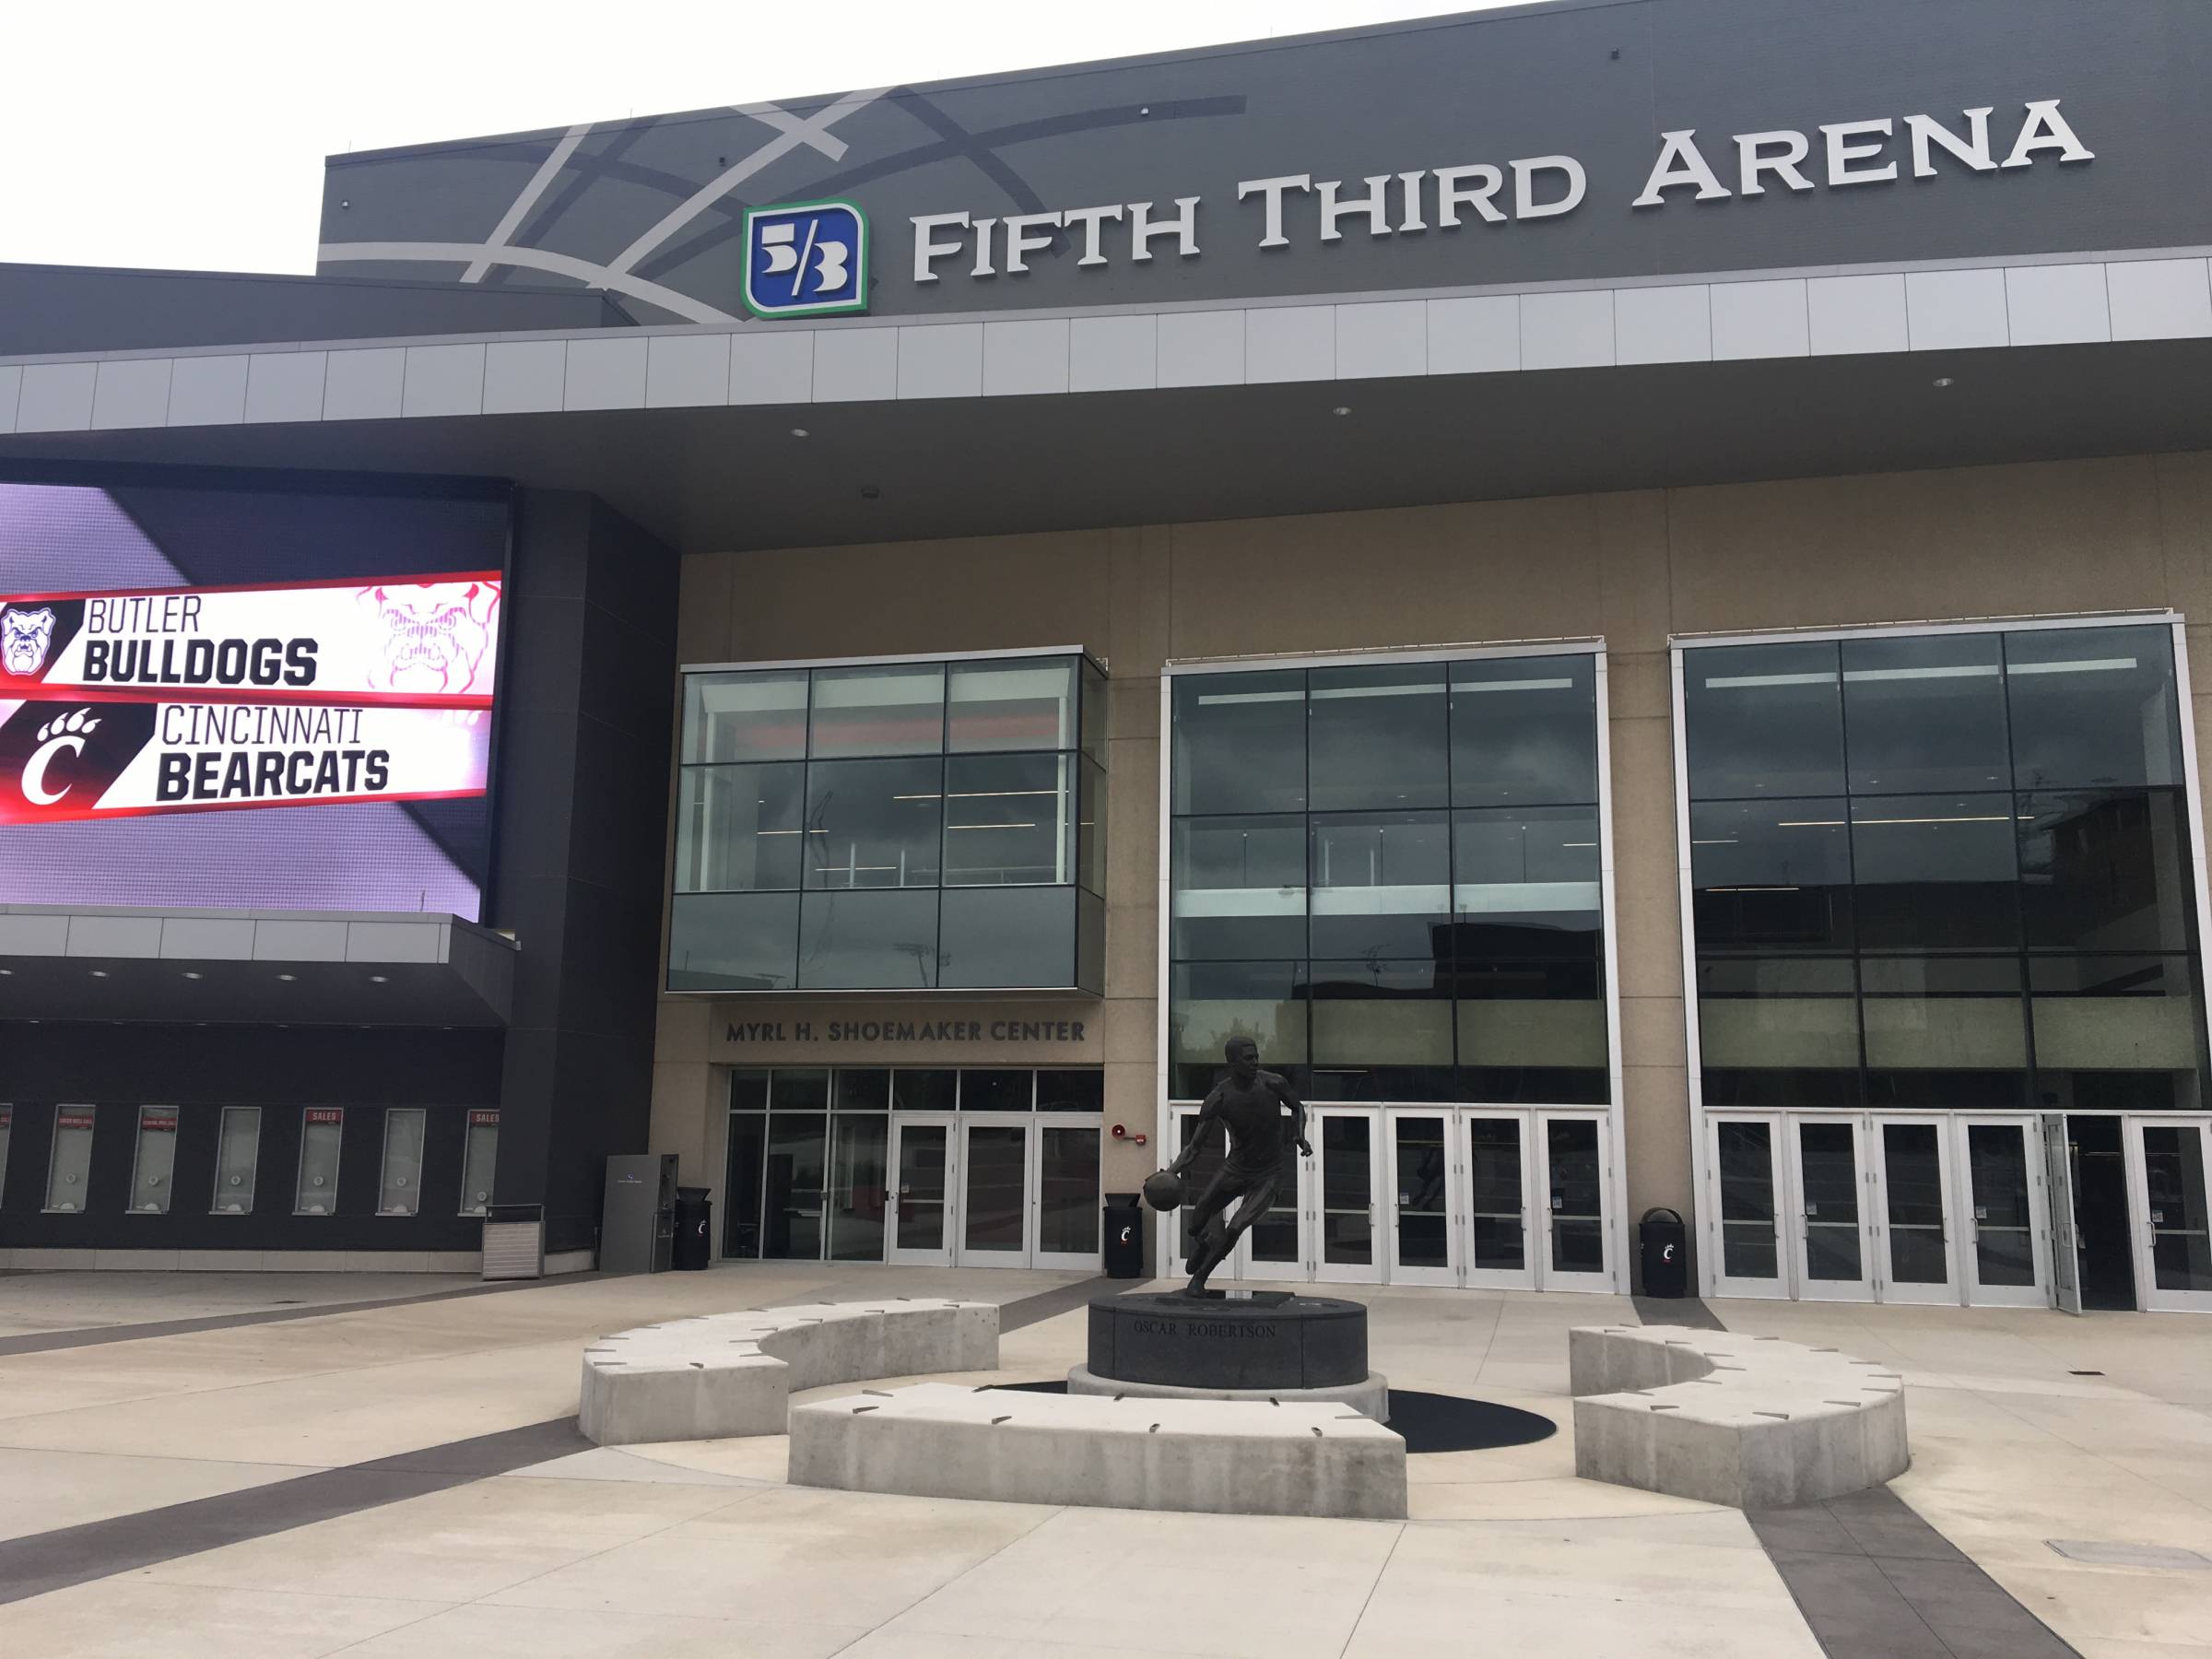 Outside view of Fifth Third Arena